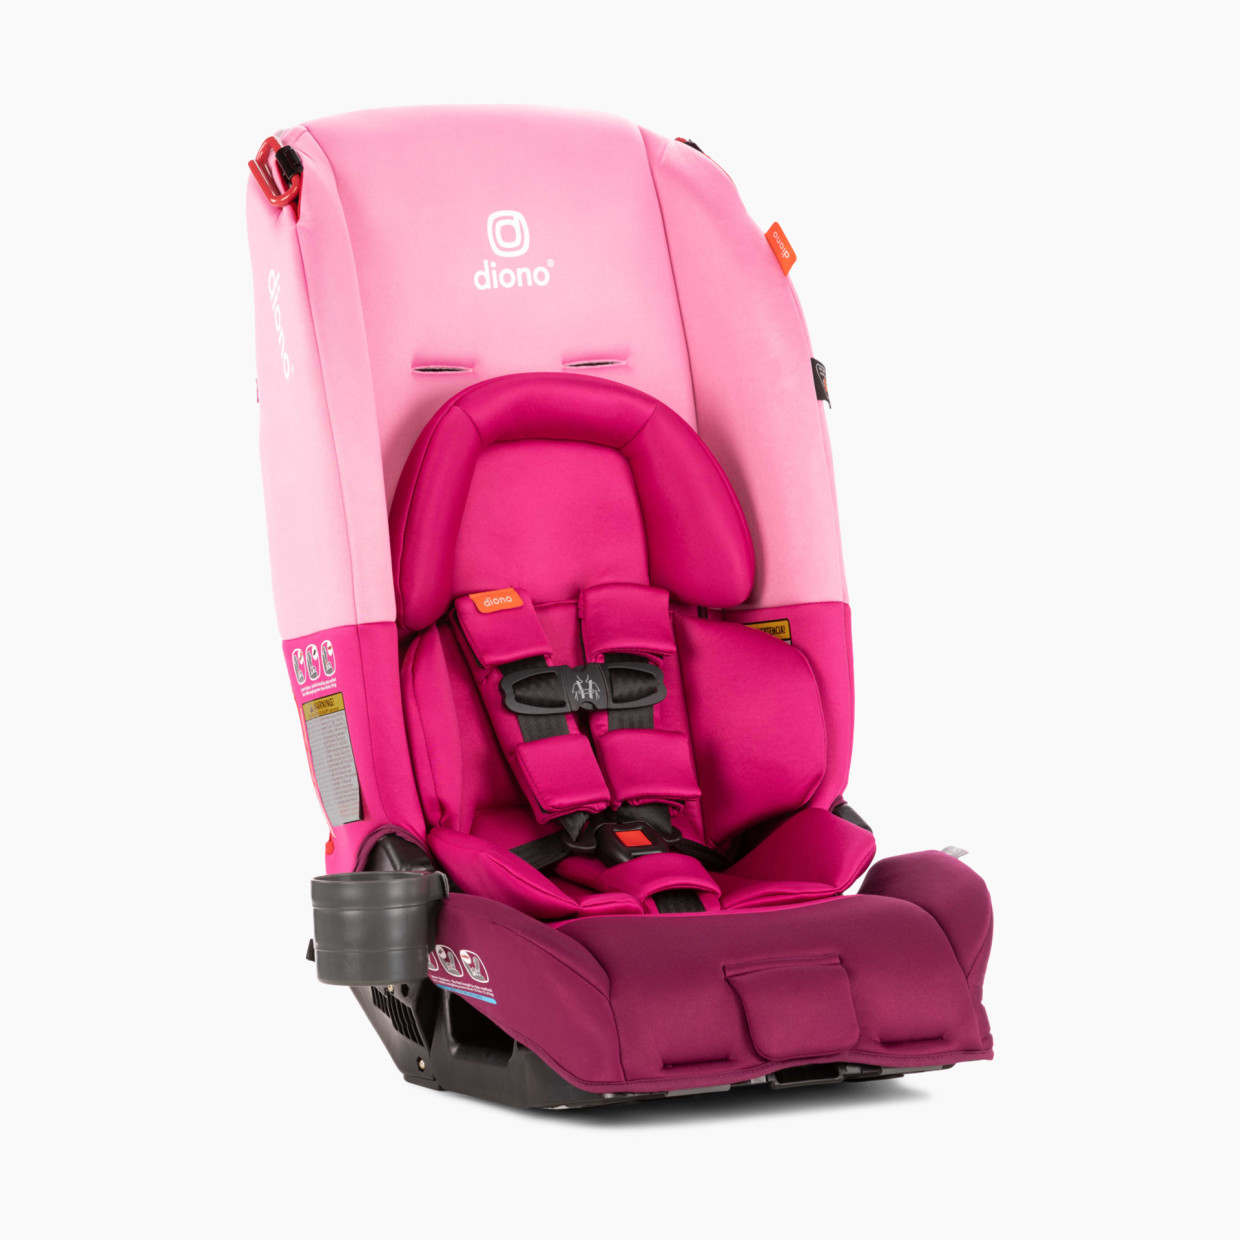 Diono Radian 3 RX All-In-One Convertible Car Seat - Pink.